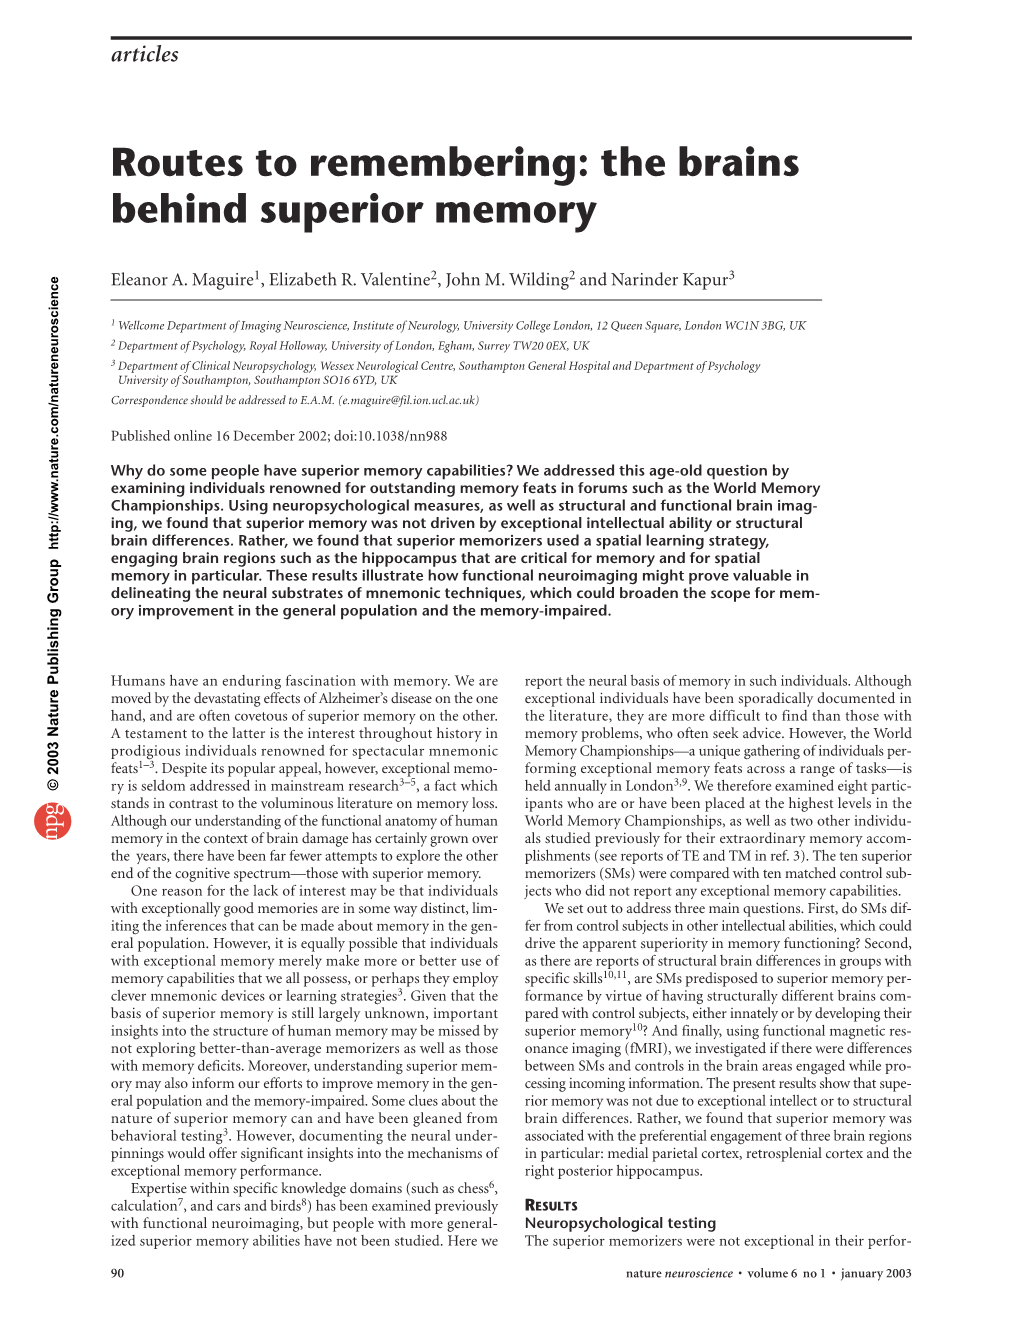 Routes to Remembering: the Brains Behind Superior Memory